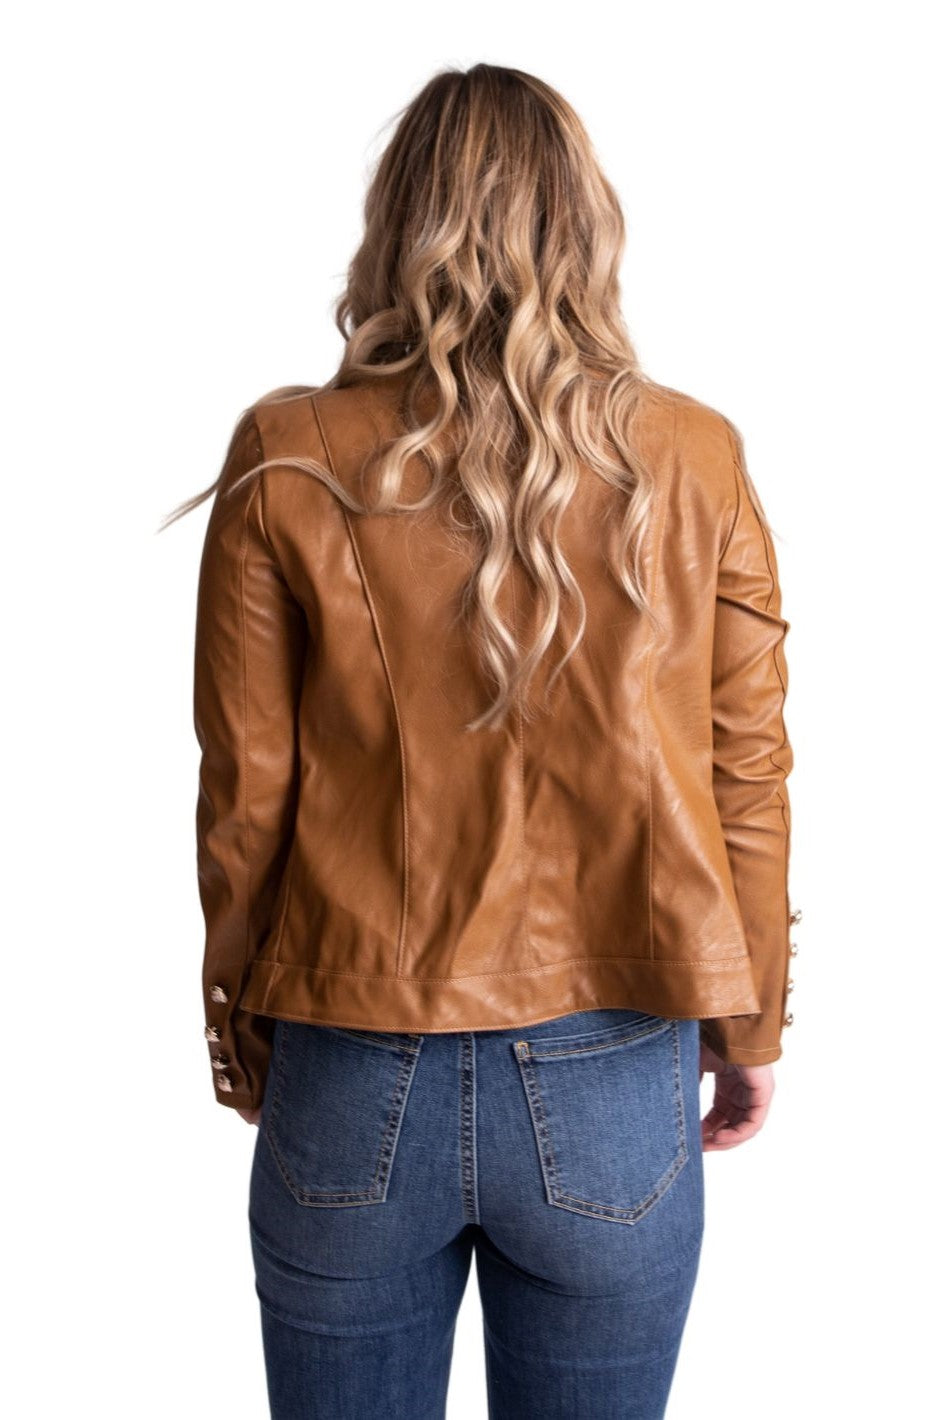 SGT Pepper Faux Leather Military Jacket - Expressive Collective CO.